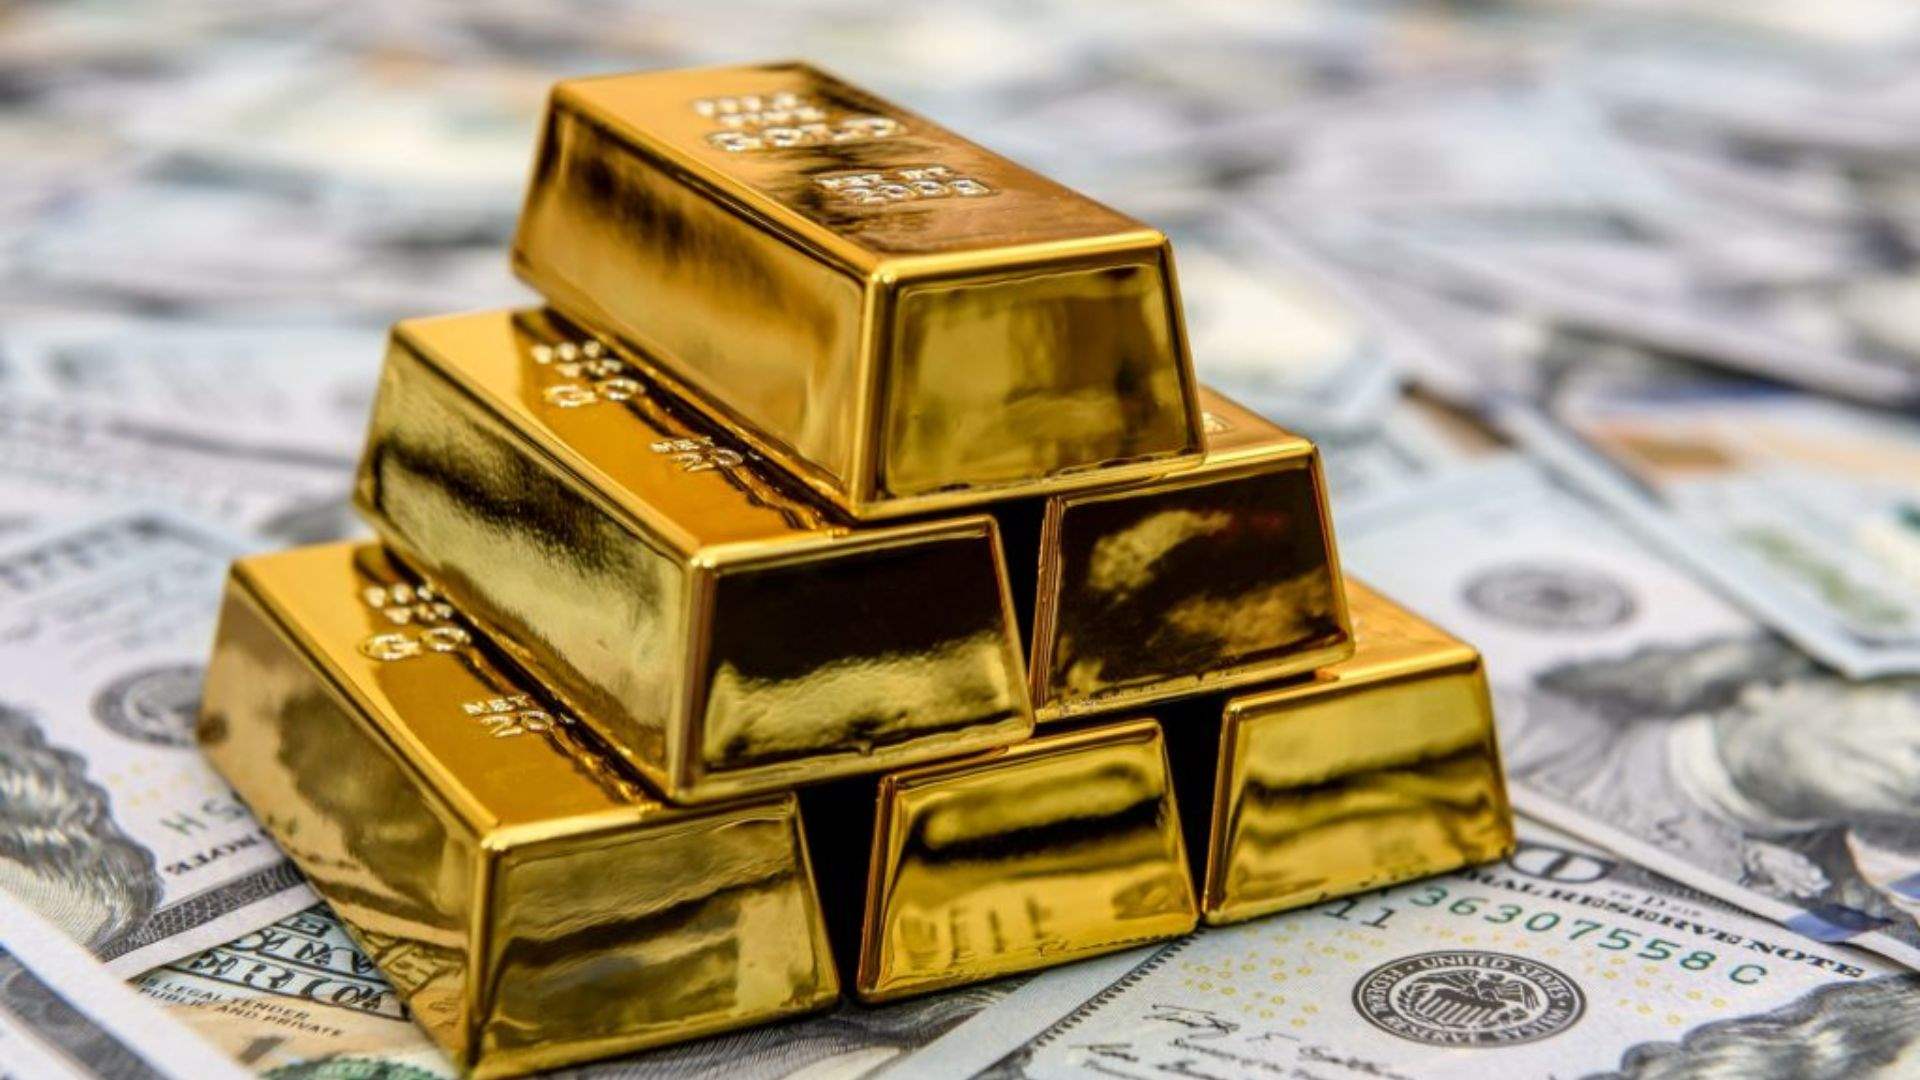 Lebanese are rushing to buy gold amid financial instability: report  